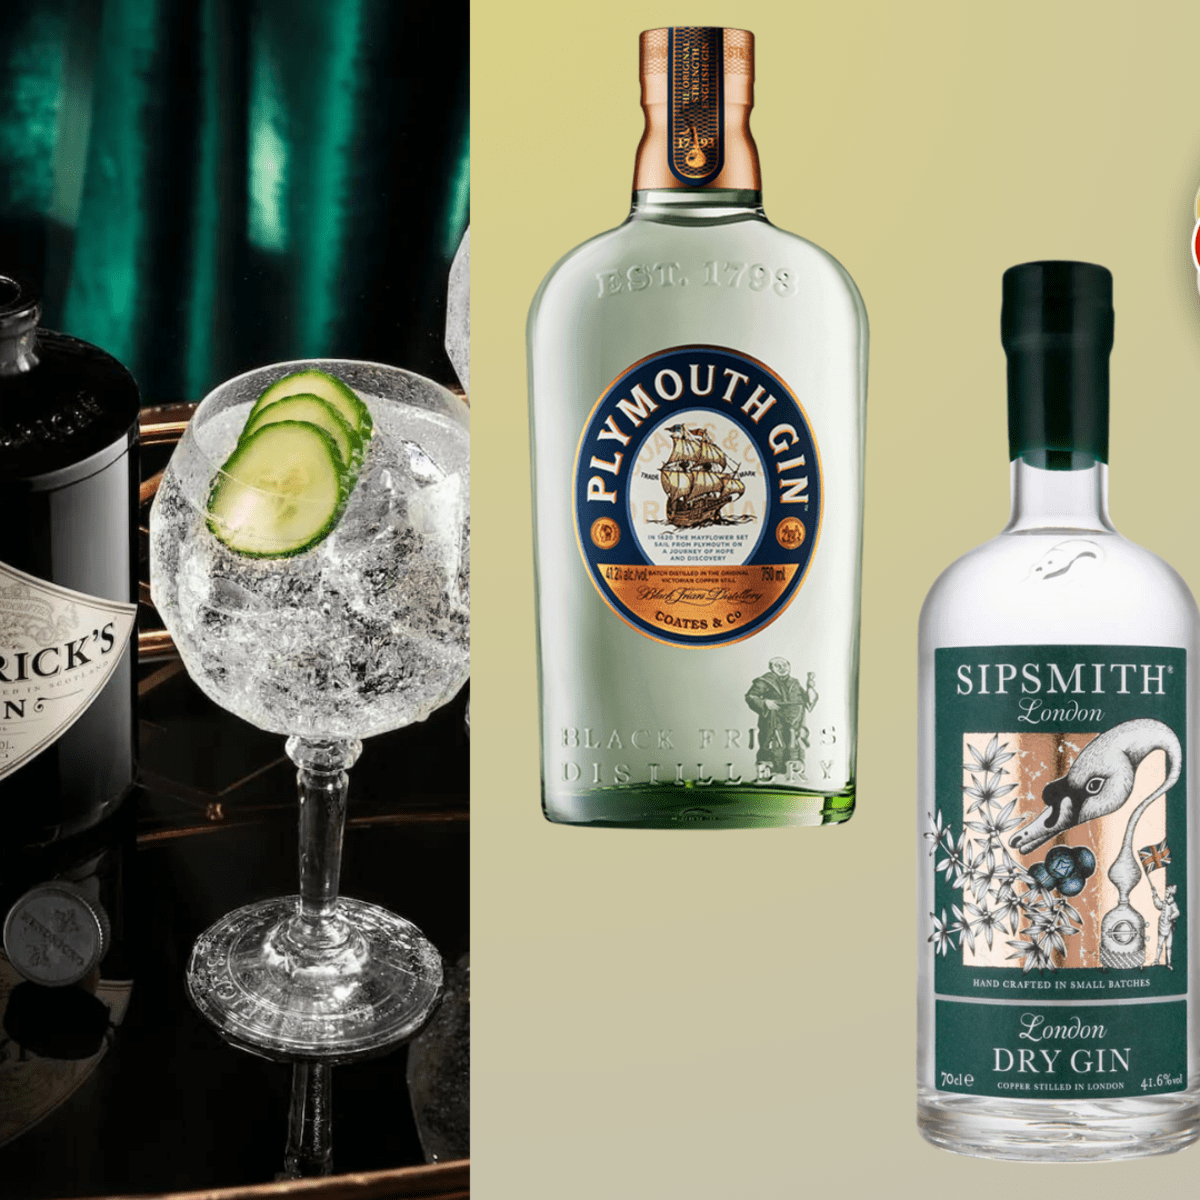 Gordon's Gin Is Dropping A New Flavour For Summer!